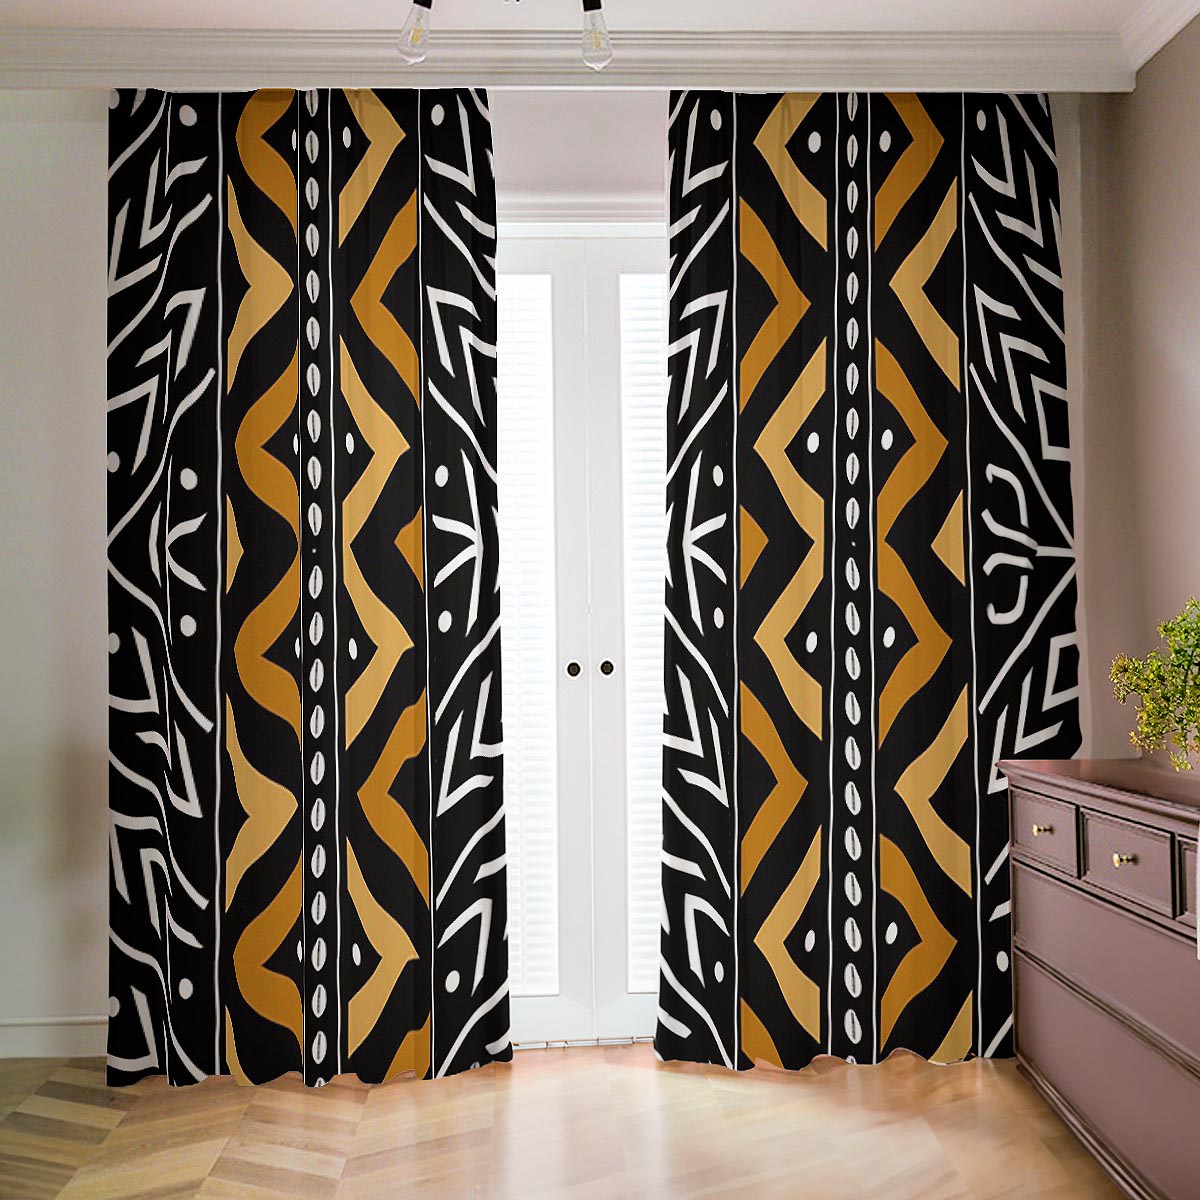 Mixed Geometric Blackout Curtain African Tribal Print(Two-Piece)